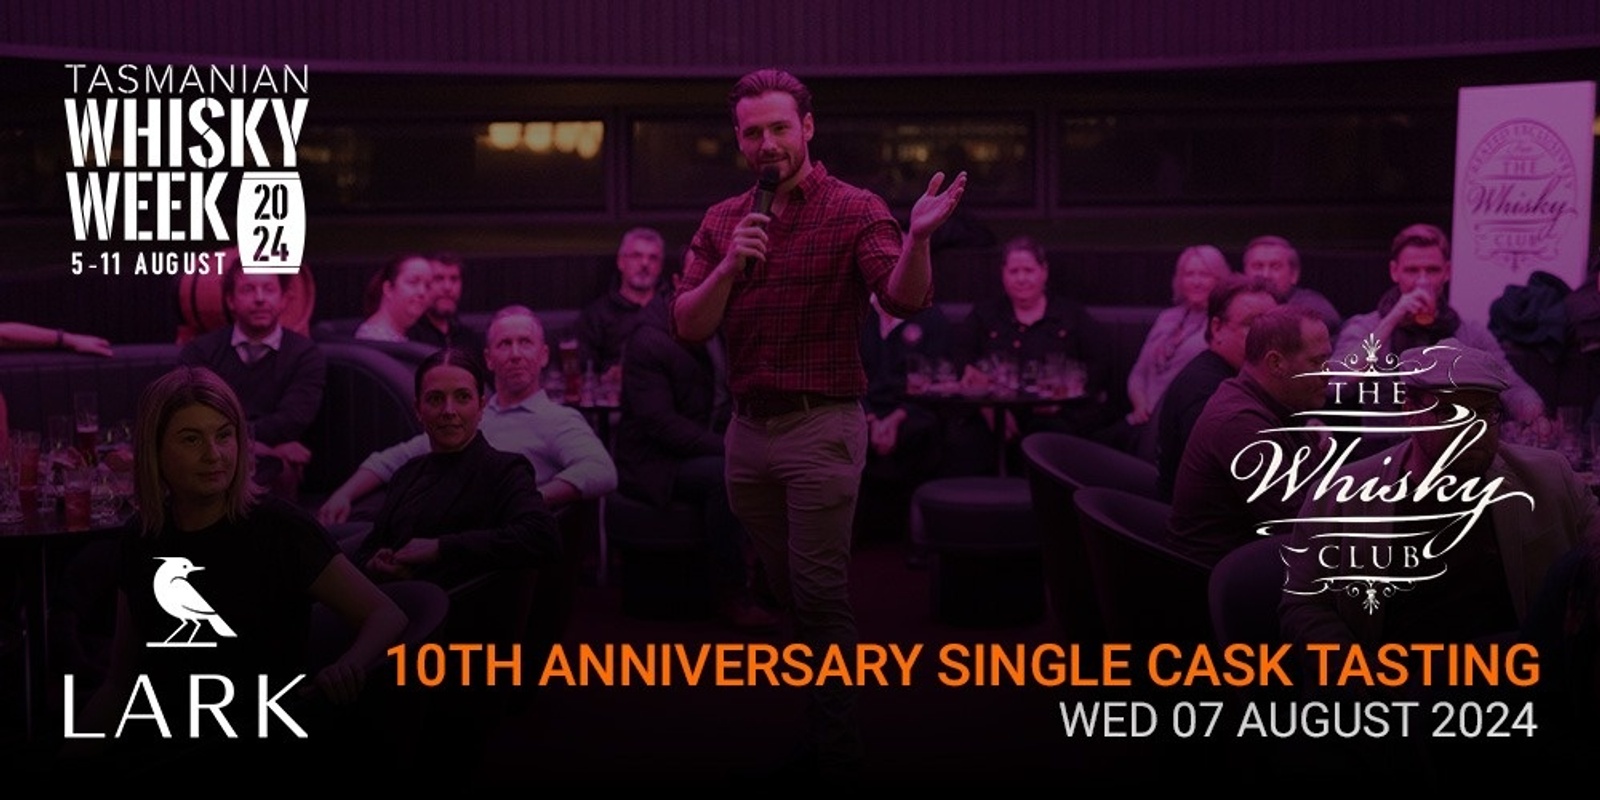 Banner image for Tas Whisky Week - The Whisky Club 10th Anniversary 